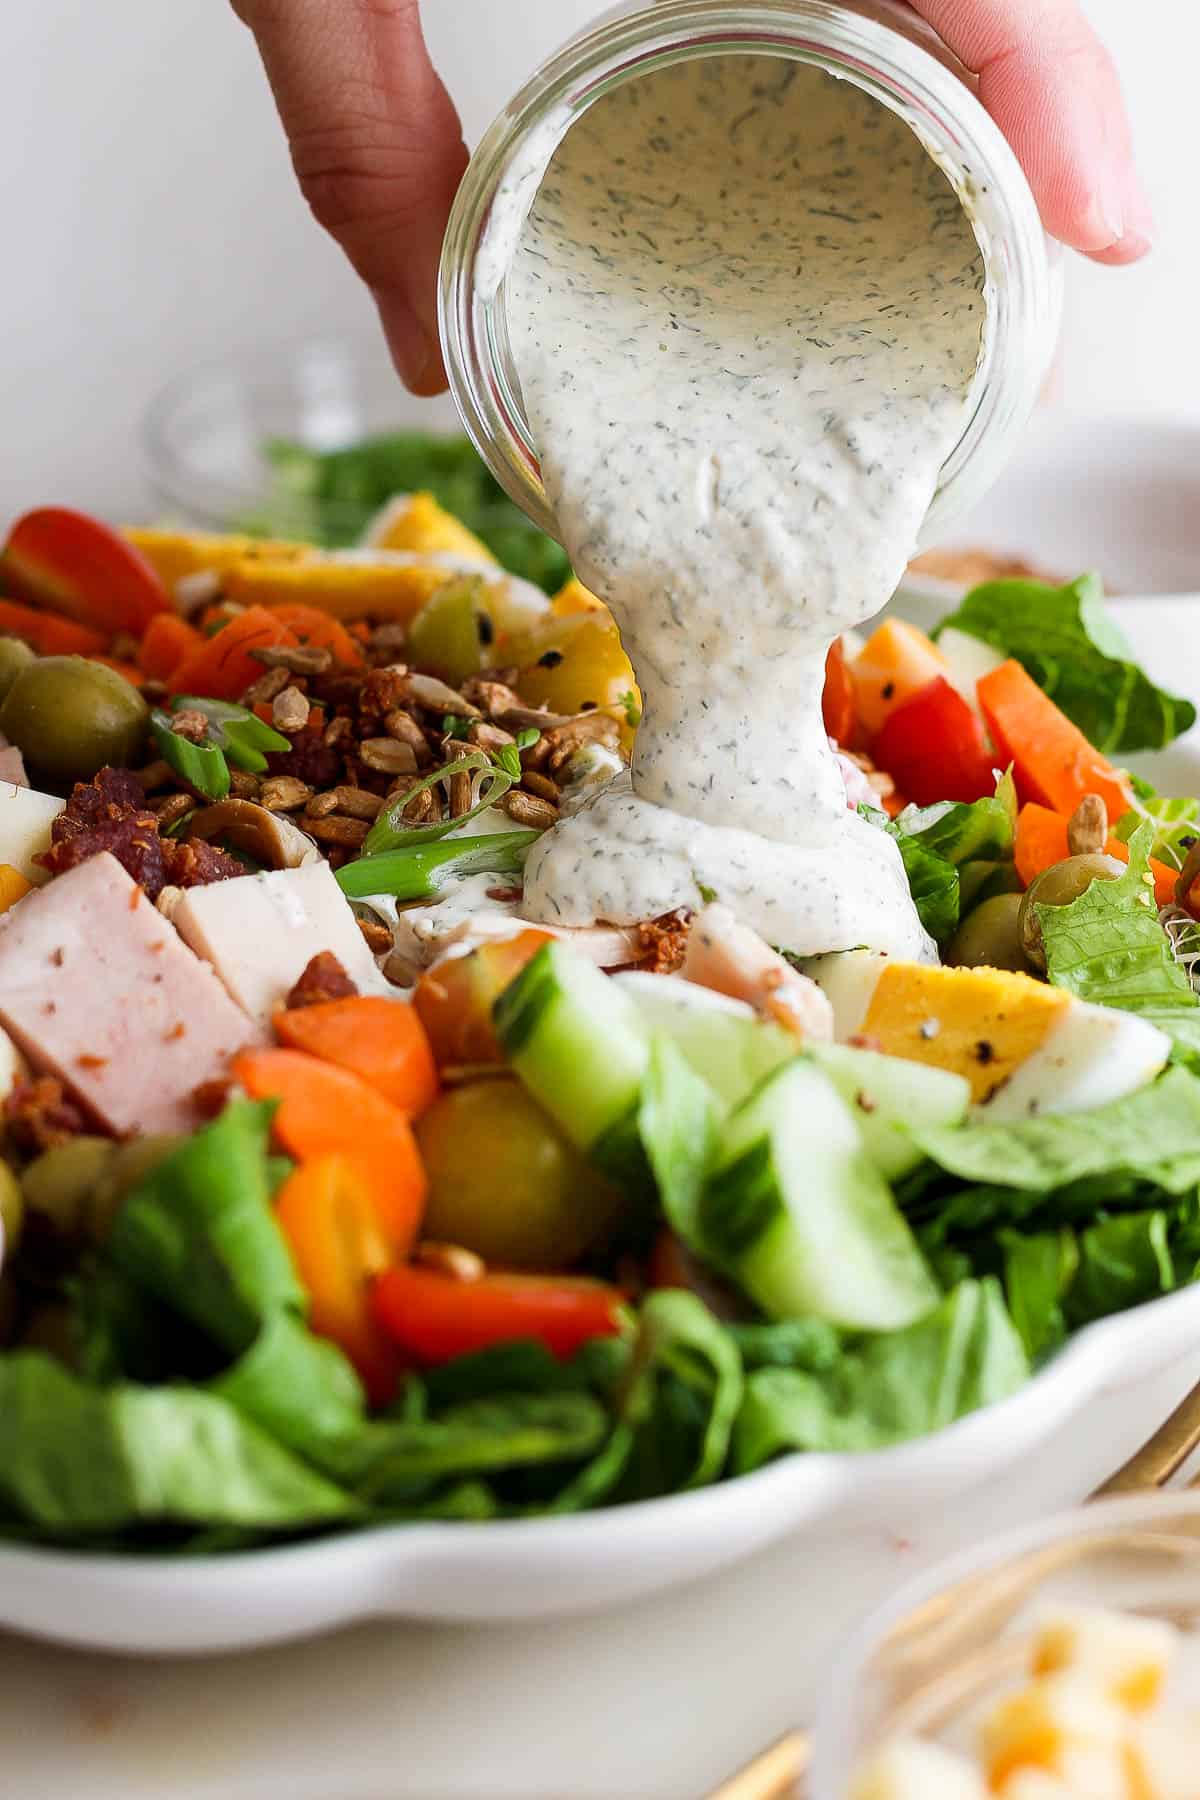 A hand pouring ranch dressing over the top of the chef salad.